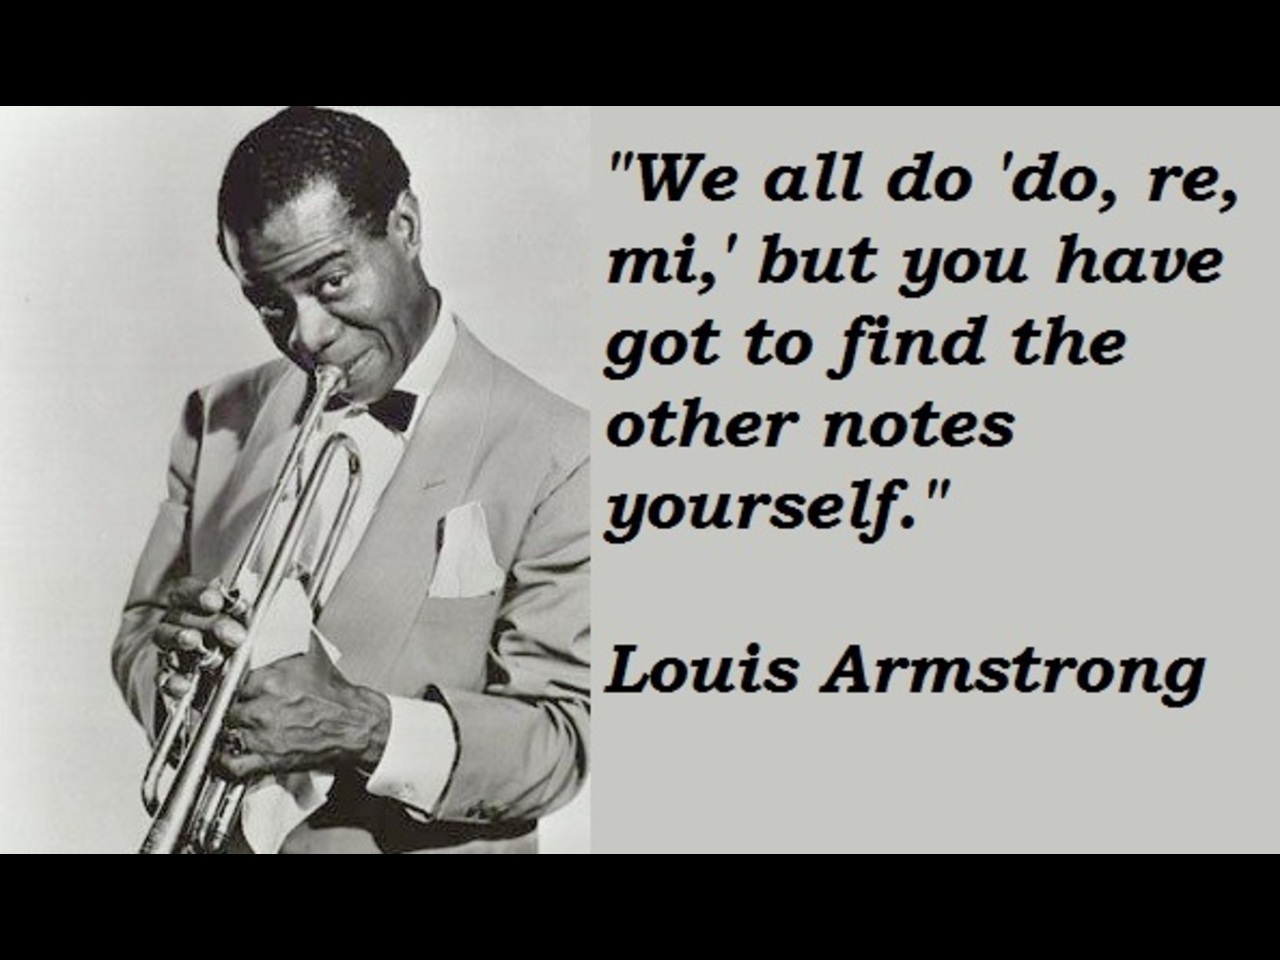 26822_louis_armstrong_quotations_sayings_famous_quotes_of_wallpaper_1280x960.jpg